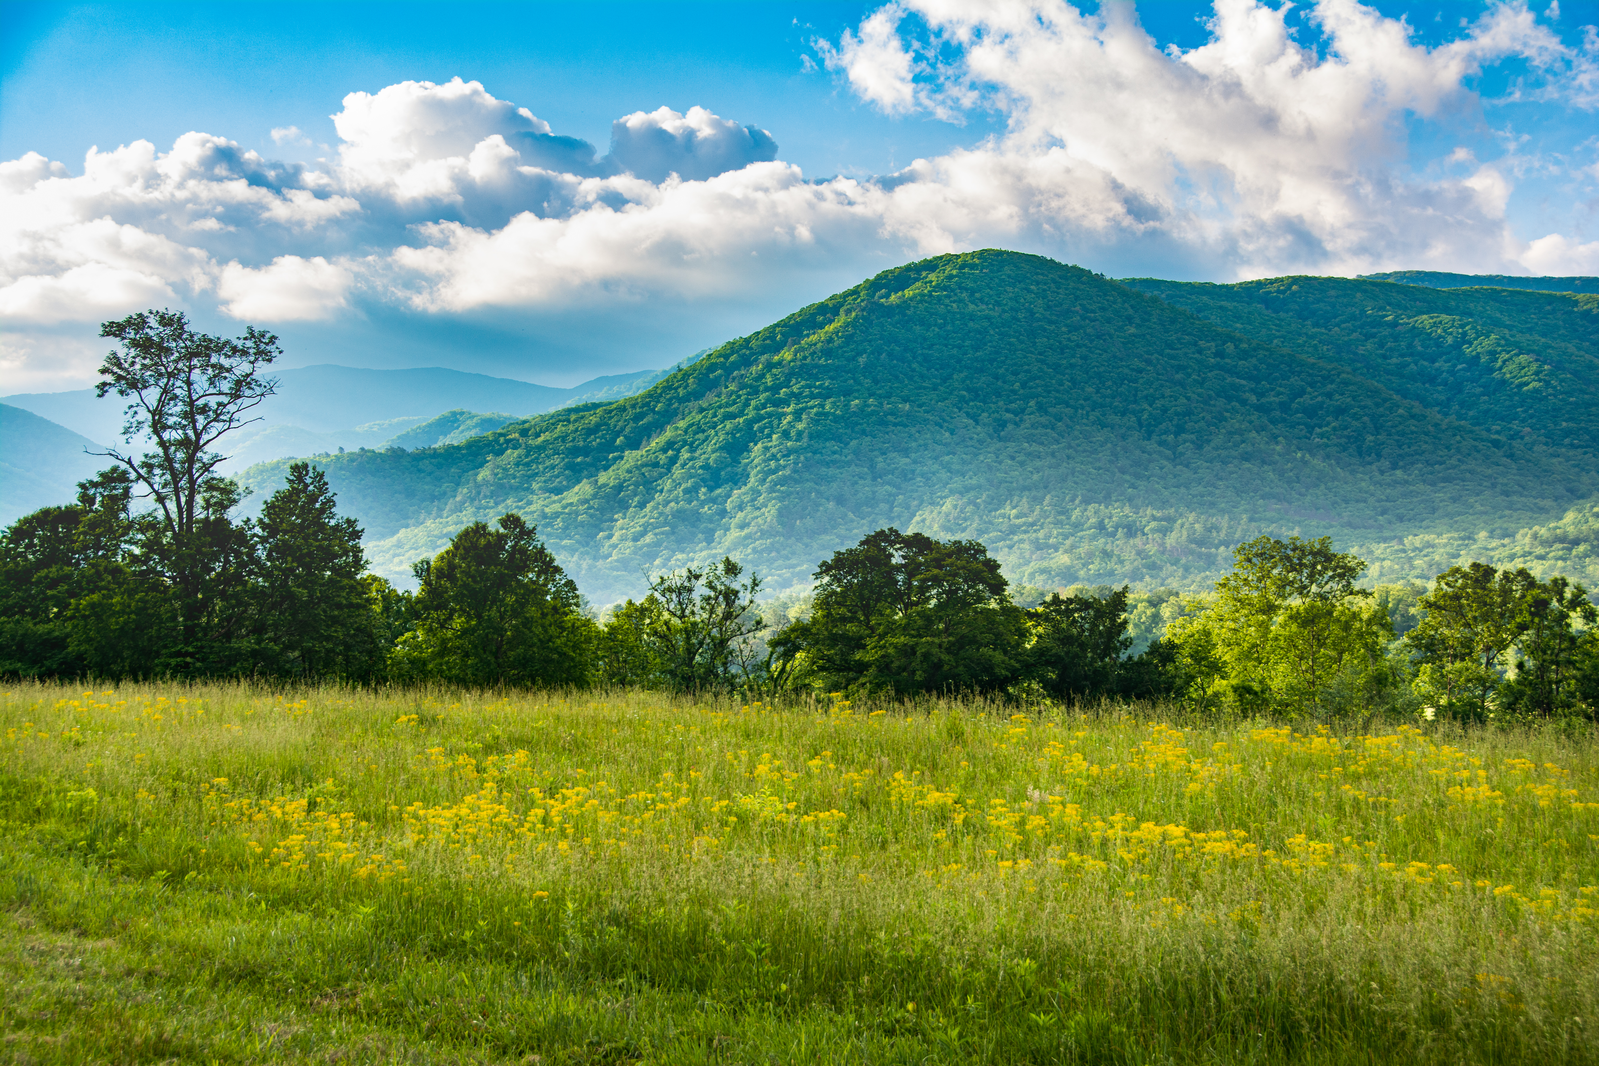 Cades Cove meadow with mountain in the distance